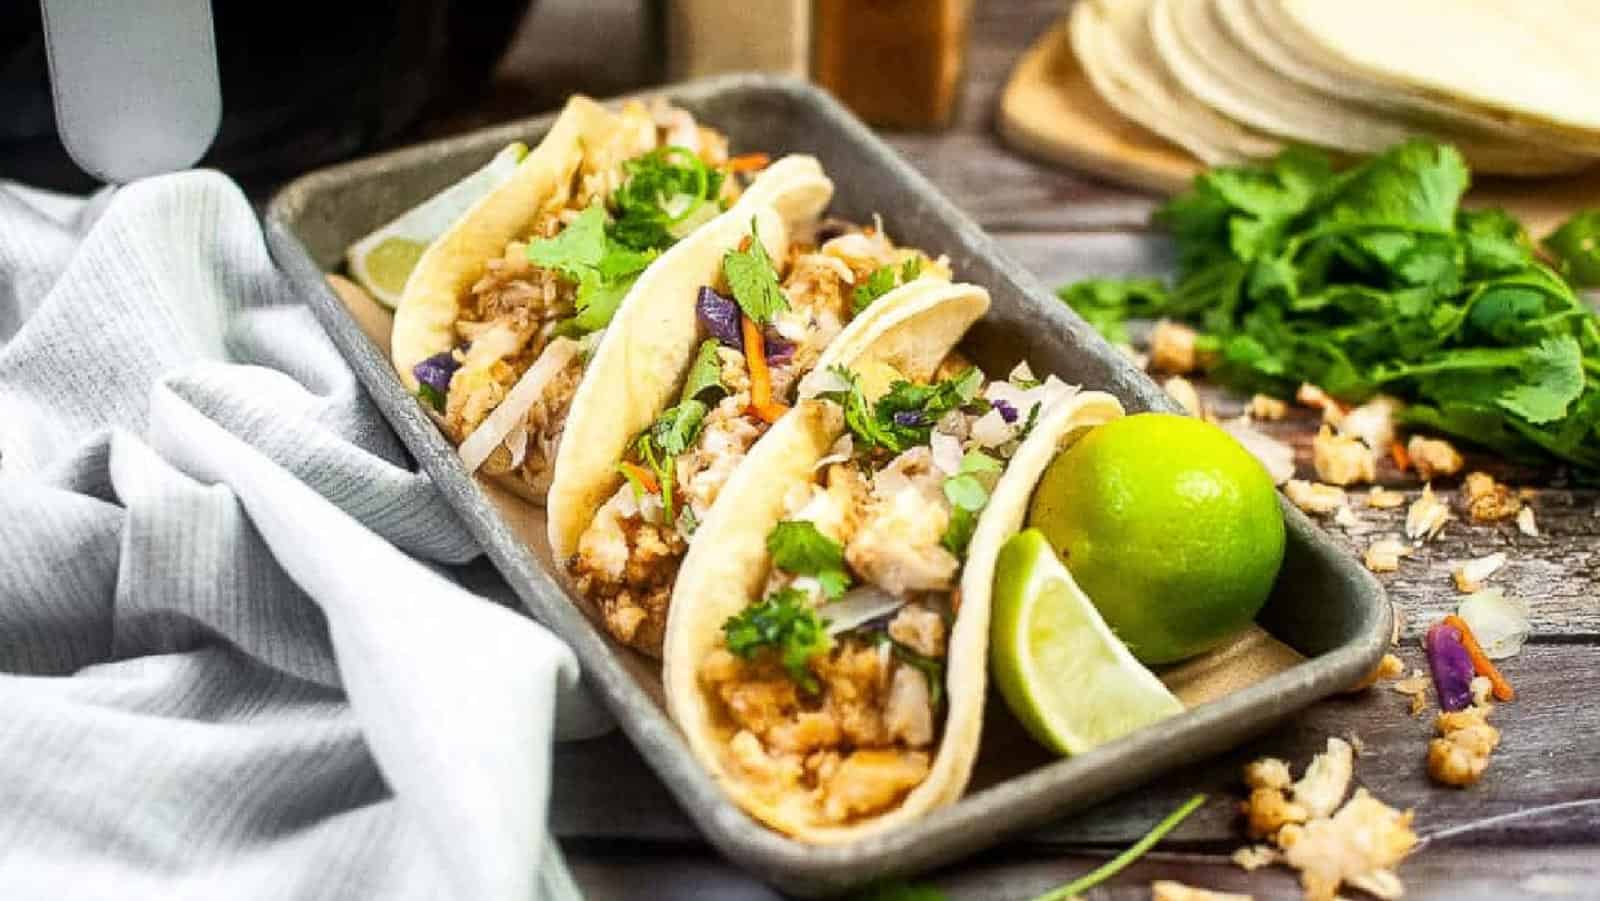 Fish tacos on a small baking sheet with limes.